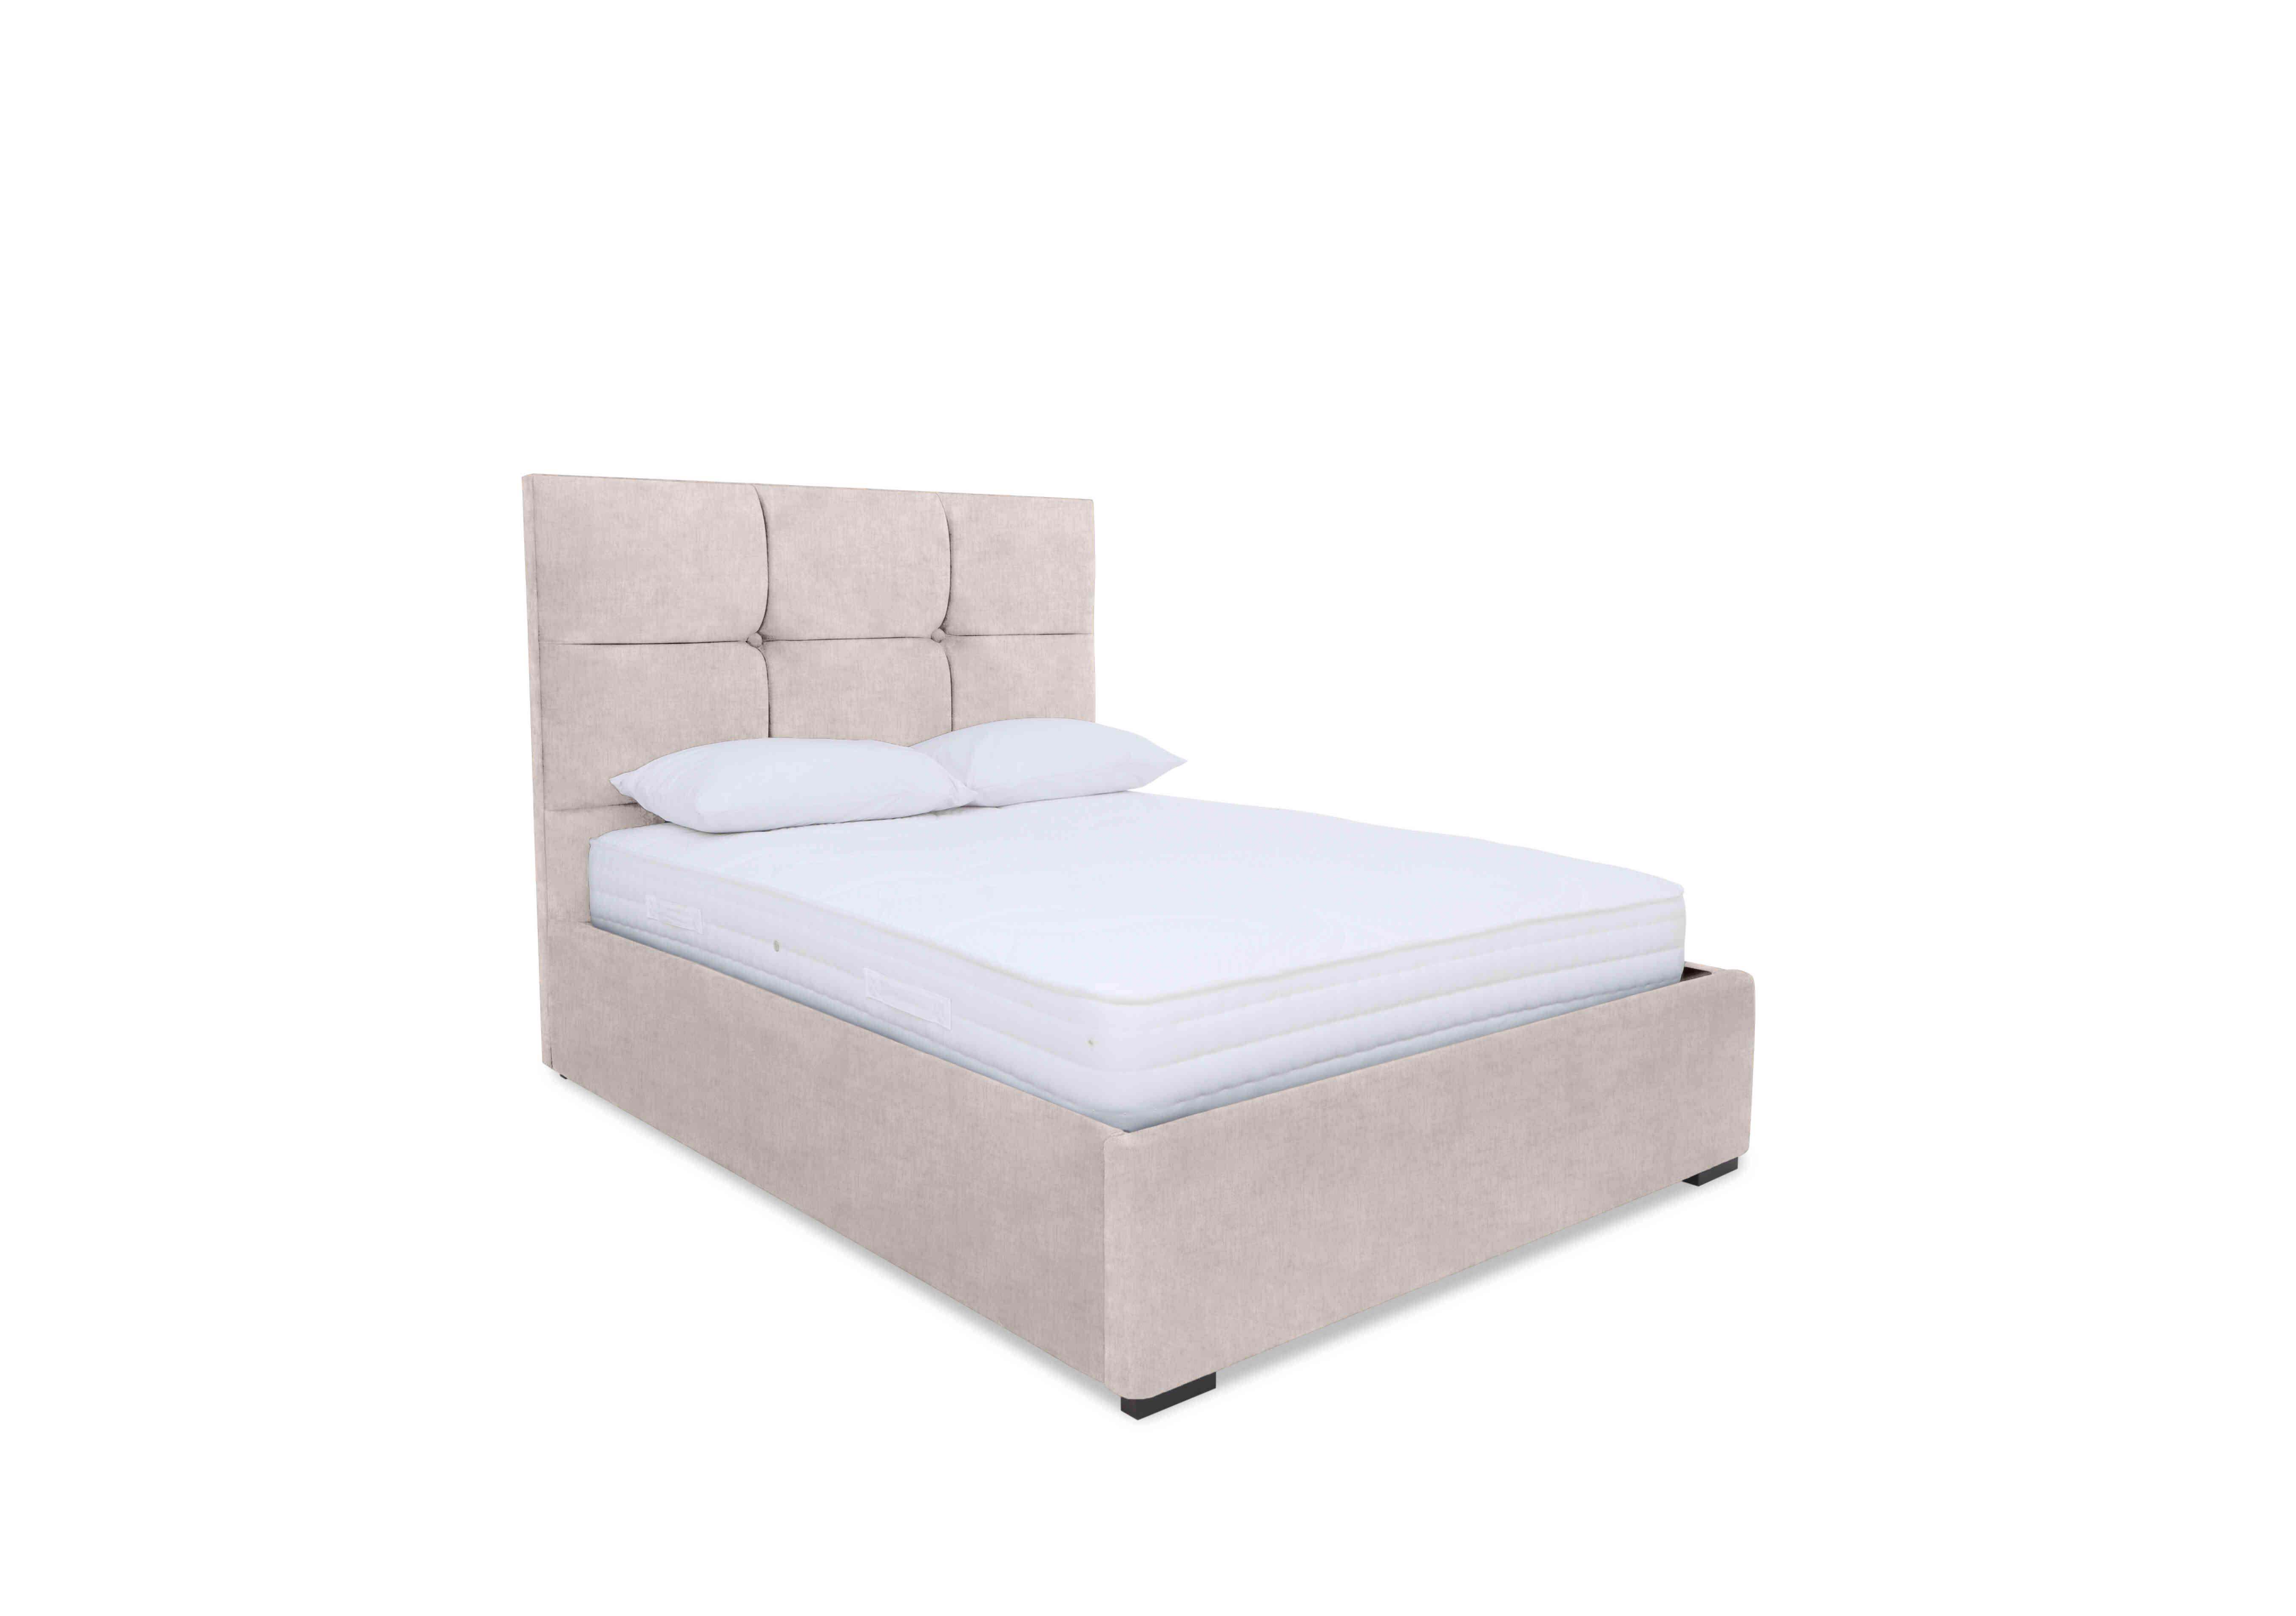 Rubix Ottoman Bed Frame in Lace Ivory on Furniture Village